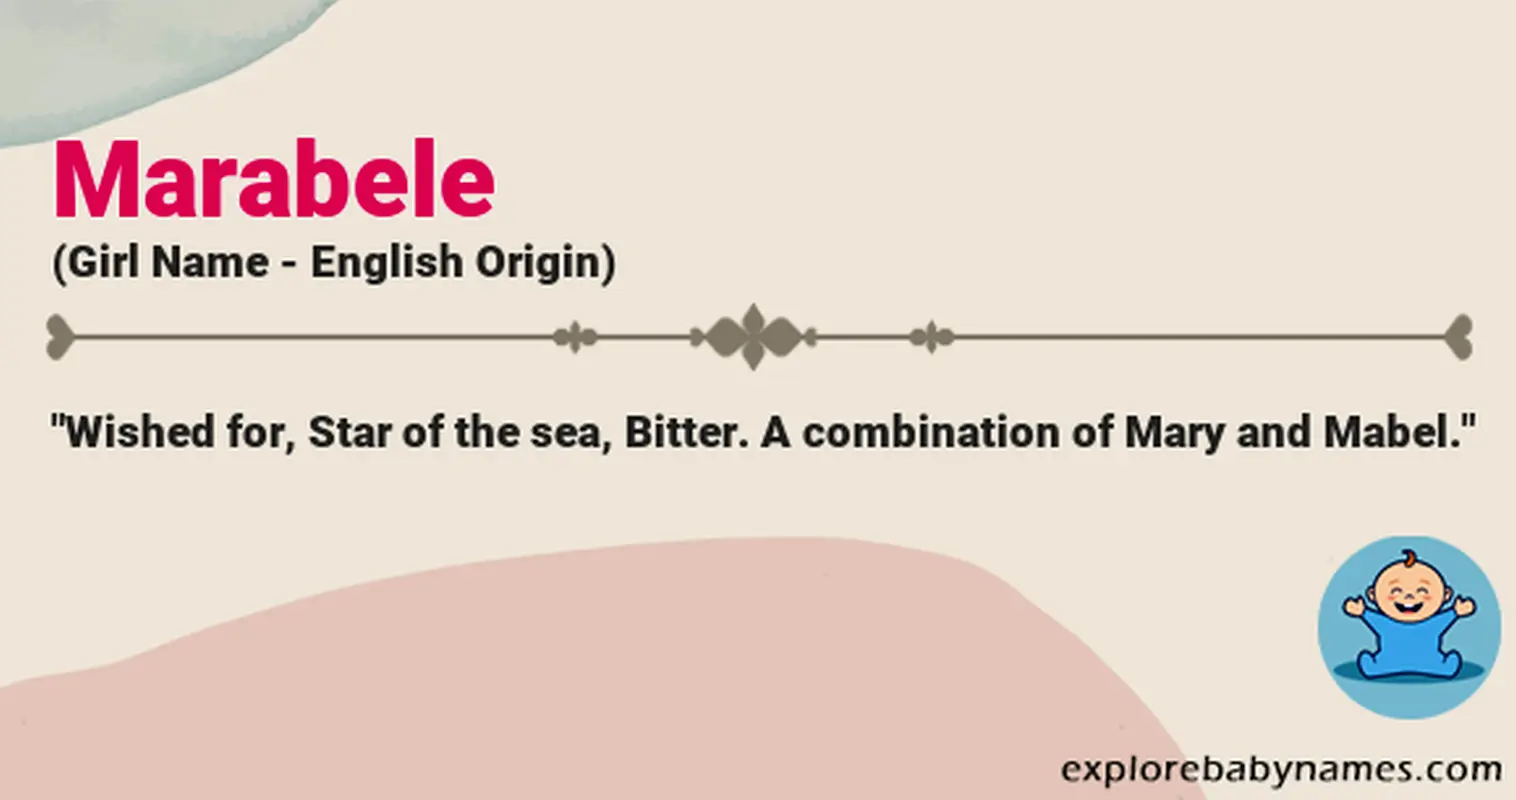 Meaning of Marabele